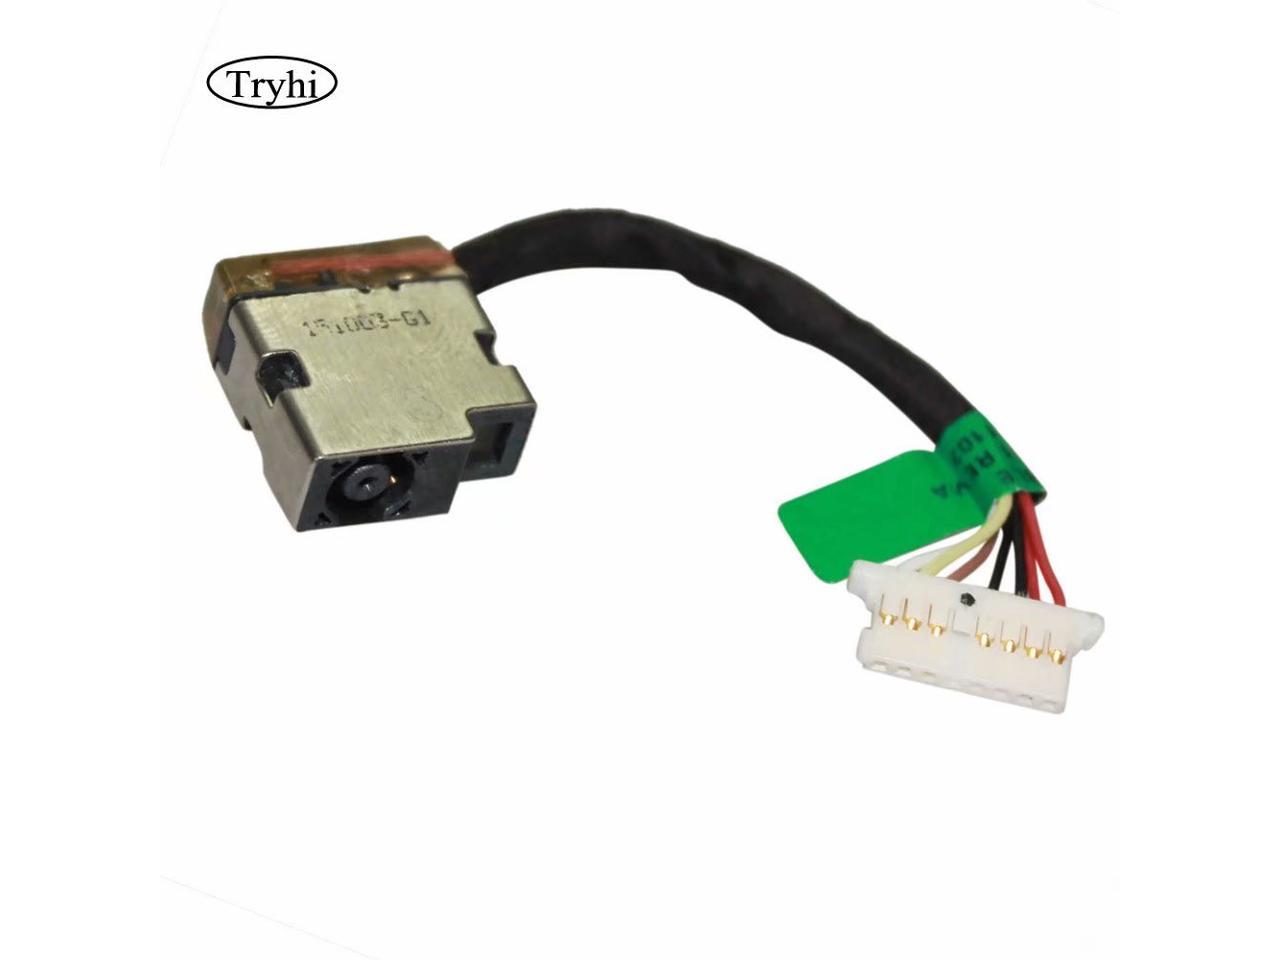 Melting Snor Vibrere New Laptop AC DC Power Jack Socket Connector Wire Cable Harness for HP Home  17-ca0011ds 17-ca0011nr 17-ca0012ds 17-ca0013ds 17-ca0014ds 17-ca0015ds  Plug in Charging Port - Newegg.com